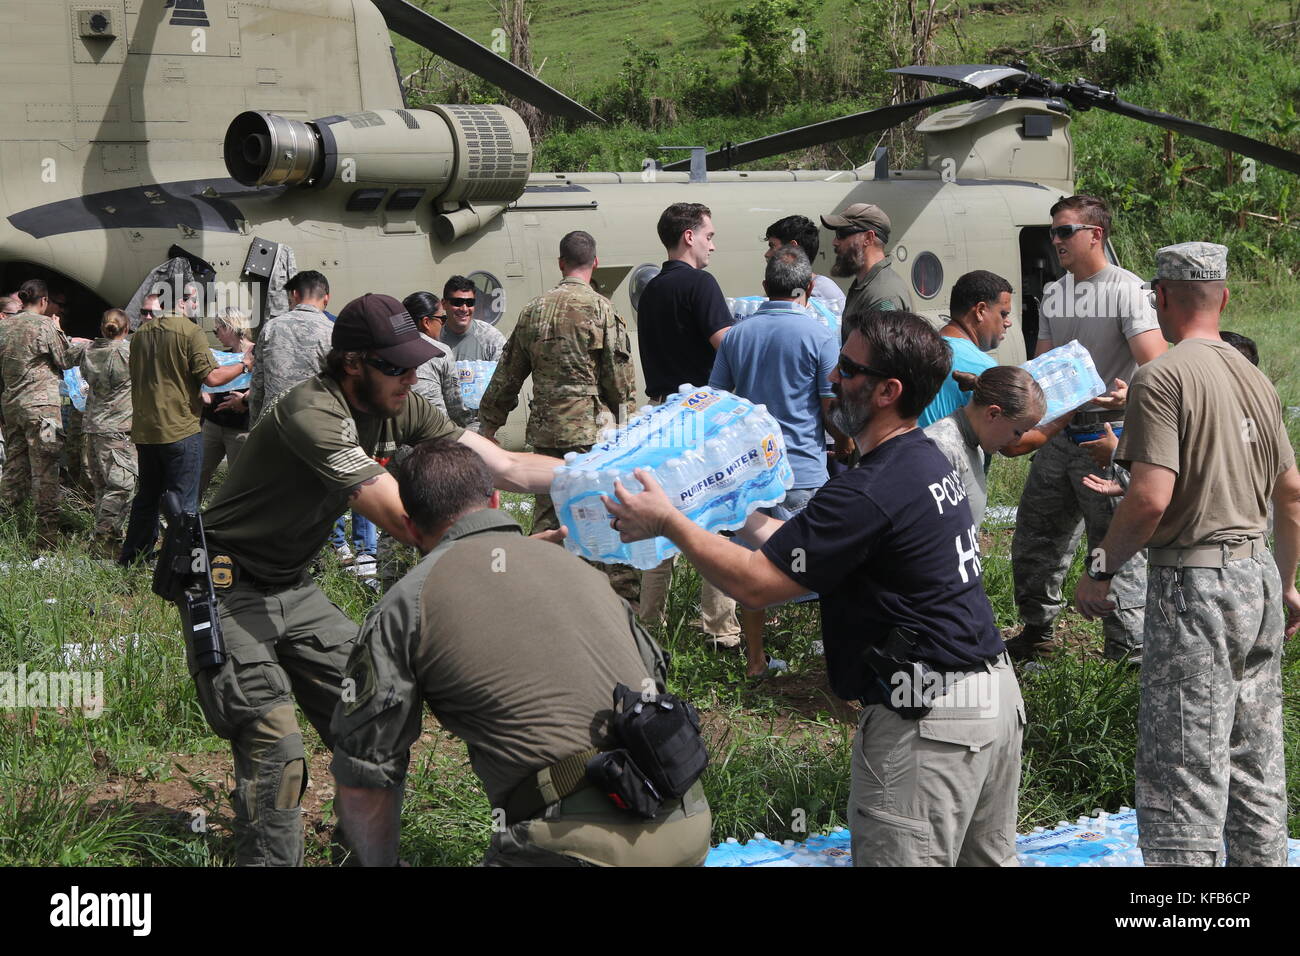 U.S. Army soldiers and U.S. Department of Homeland Security officers unload emergency supplies from a CH-47 Chinook helicopter during relief efforts in the aftermath of Hurricane Maria October 19, 2017 in Coamo, Puerto Rico.   (photo by Tyson Friar via Planetpix) Stock Photo